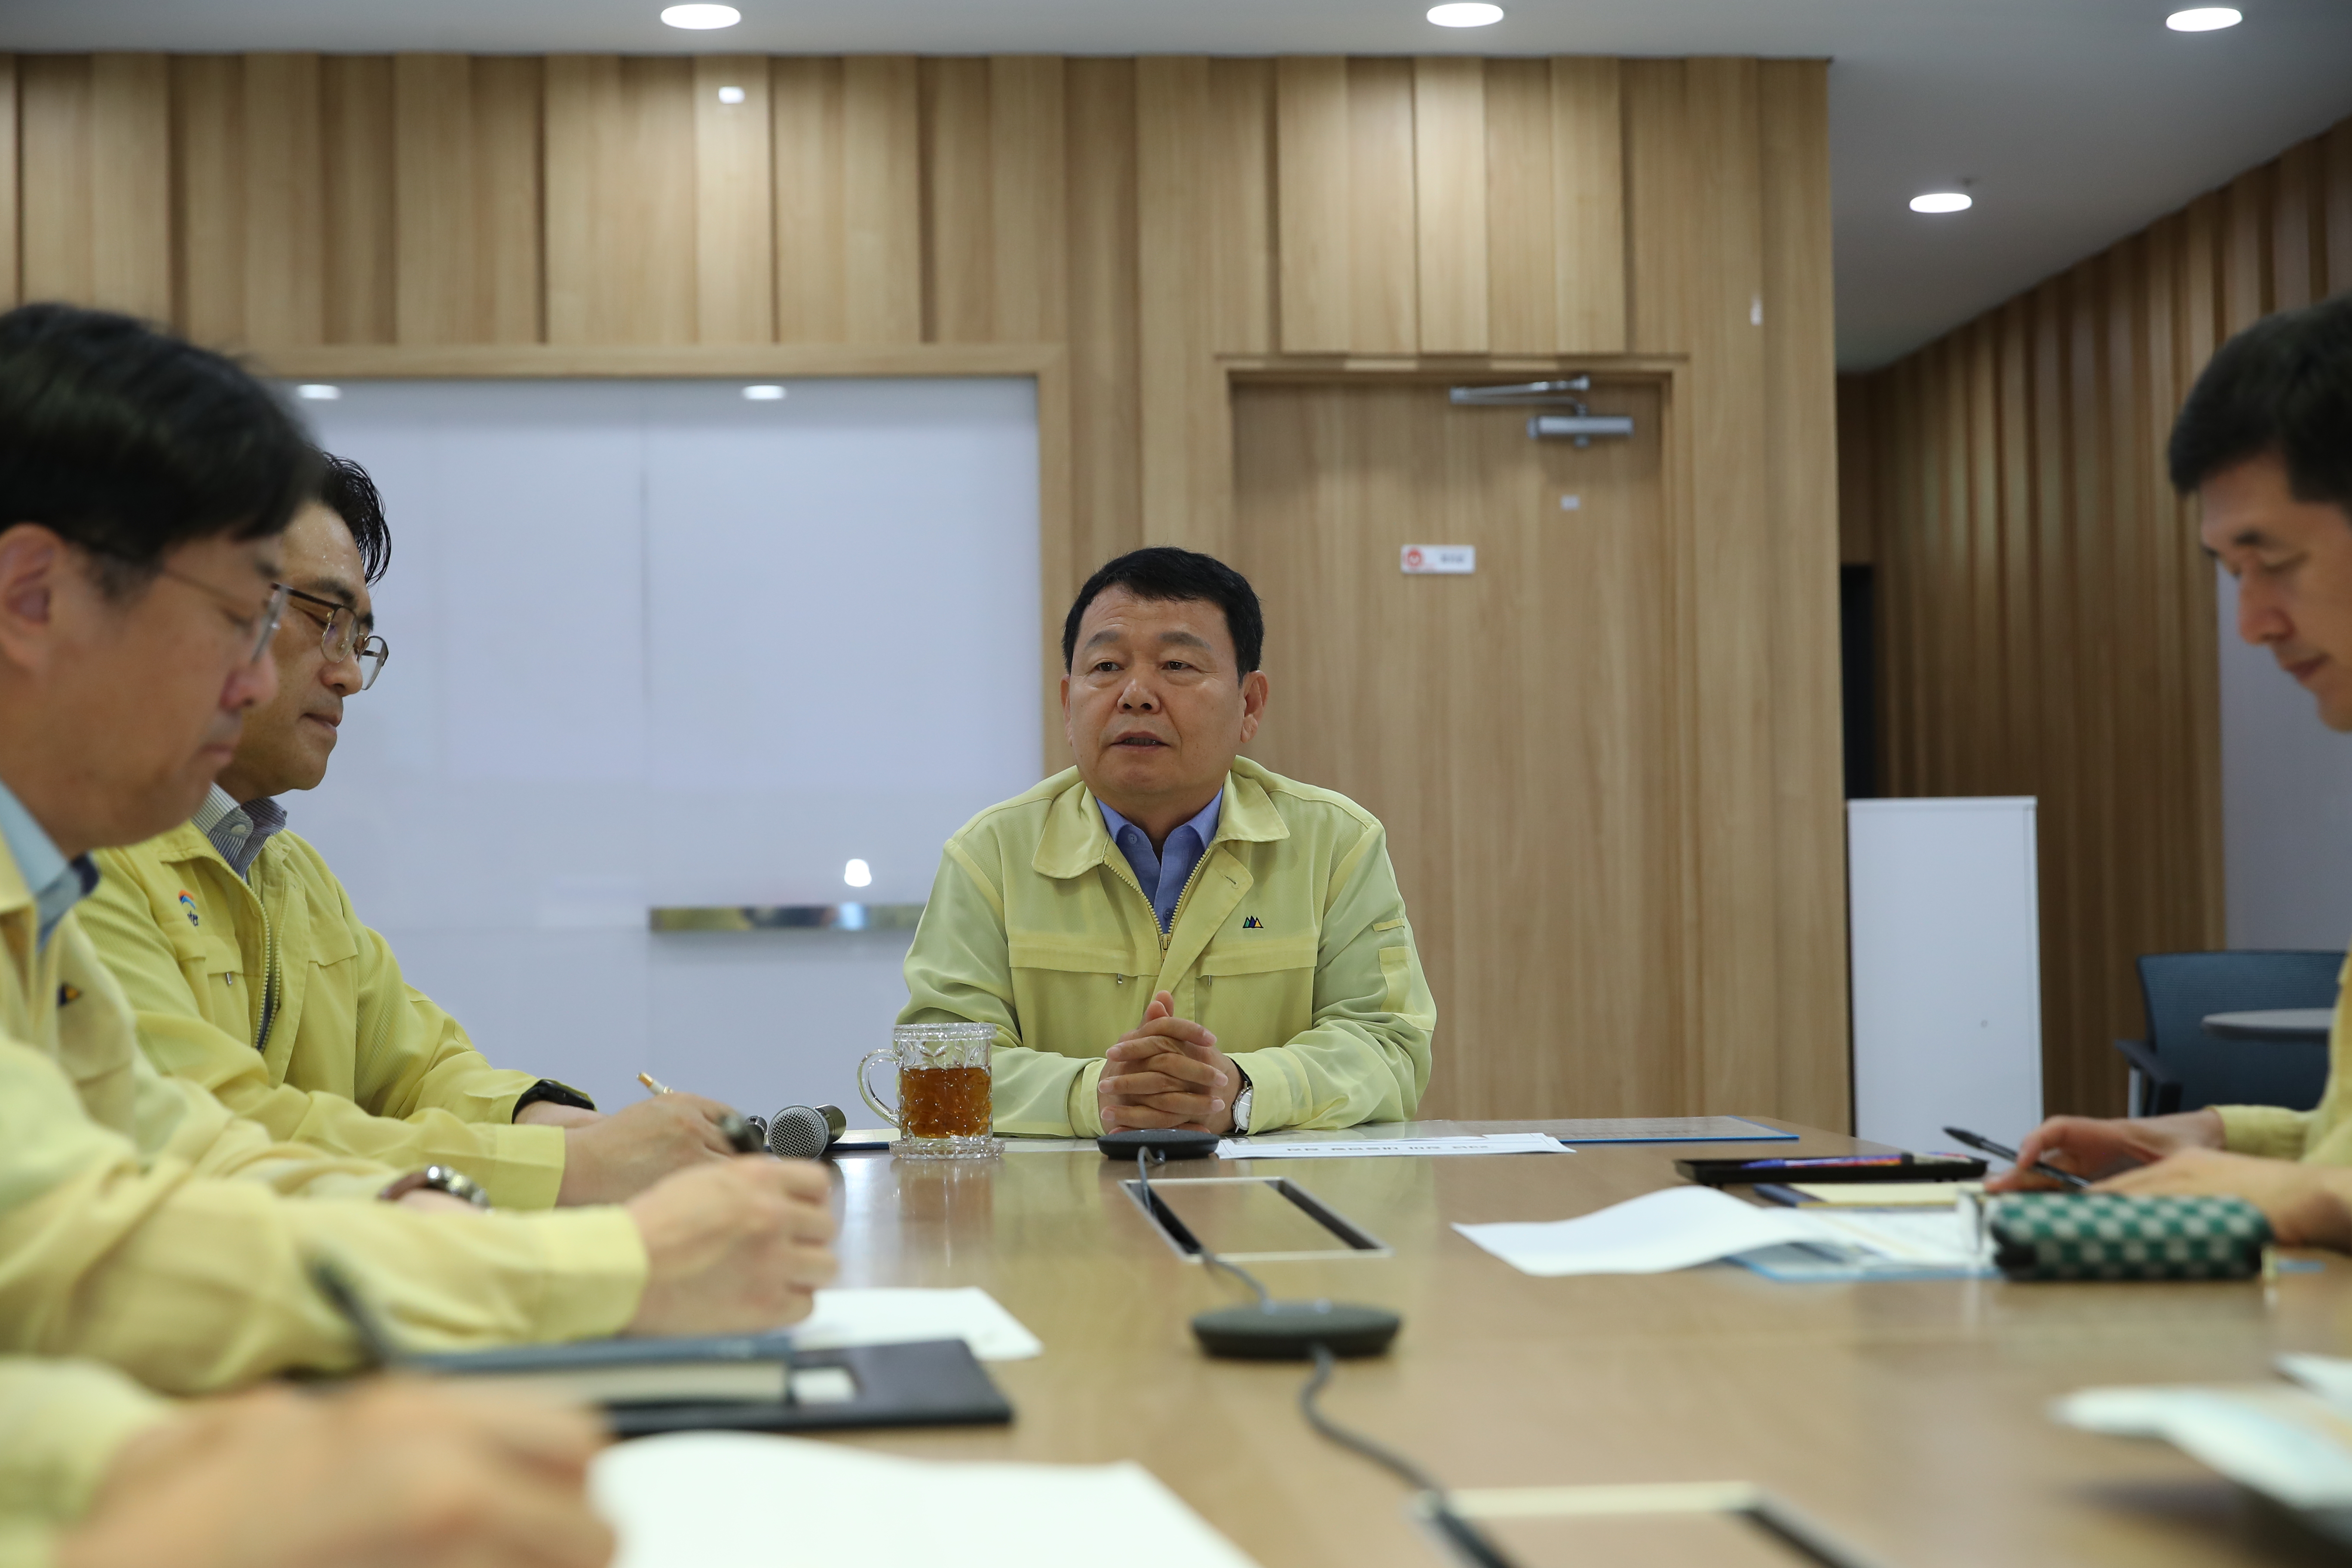 CEO Visits Water Management All-Source Situation Room